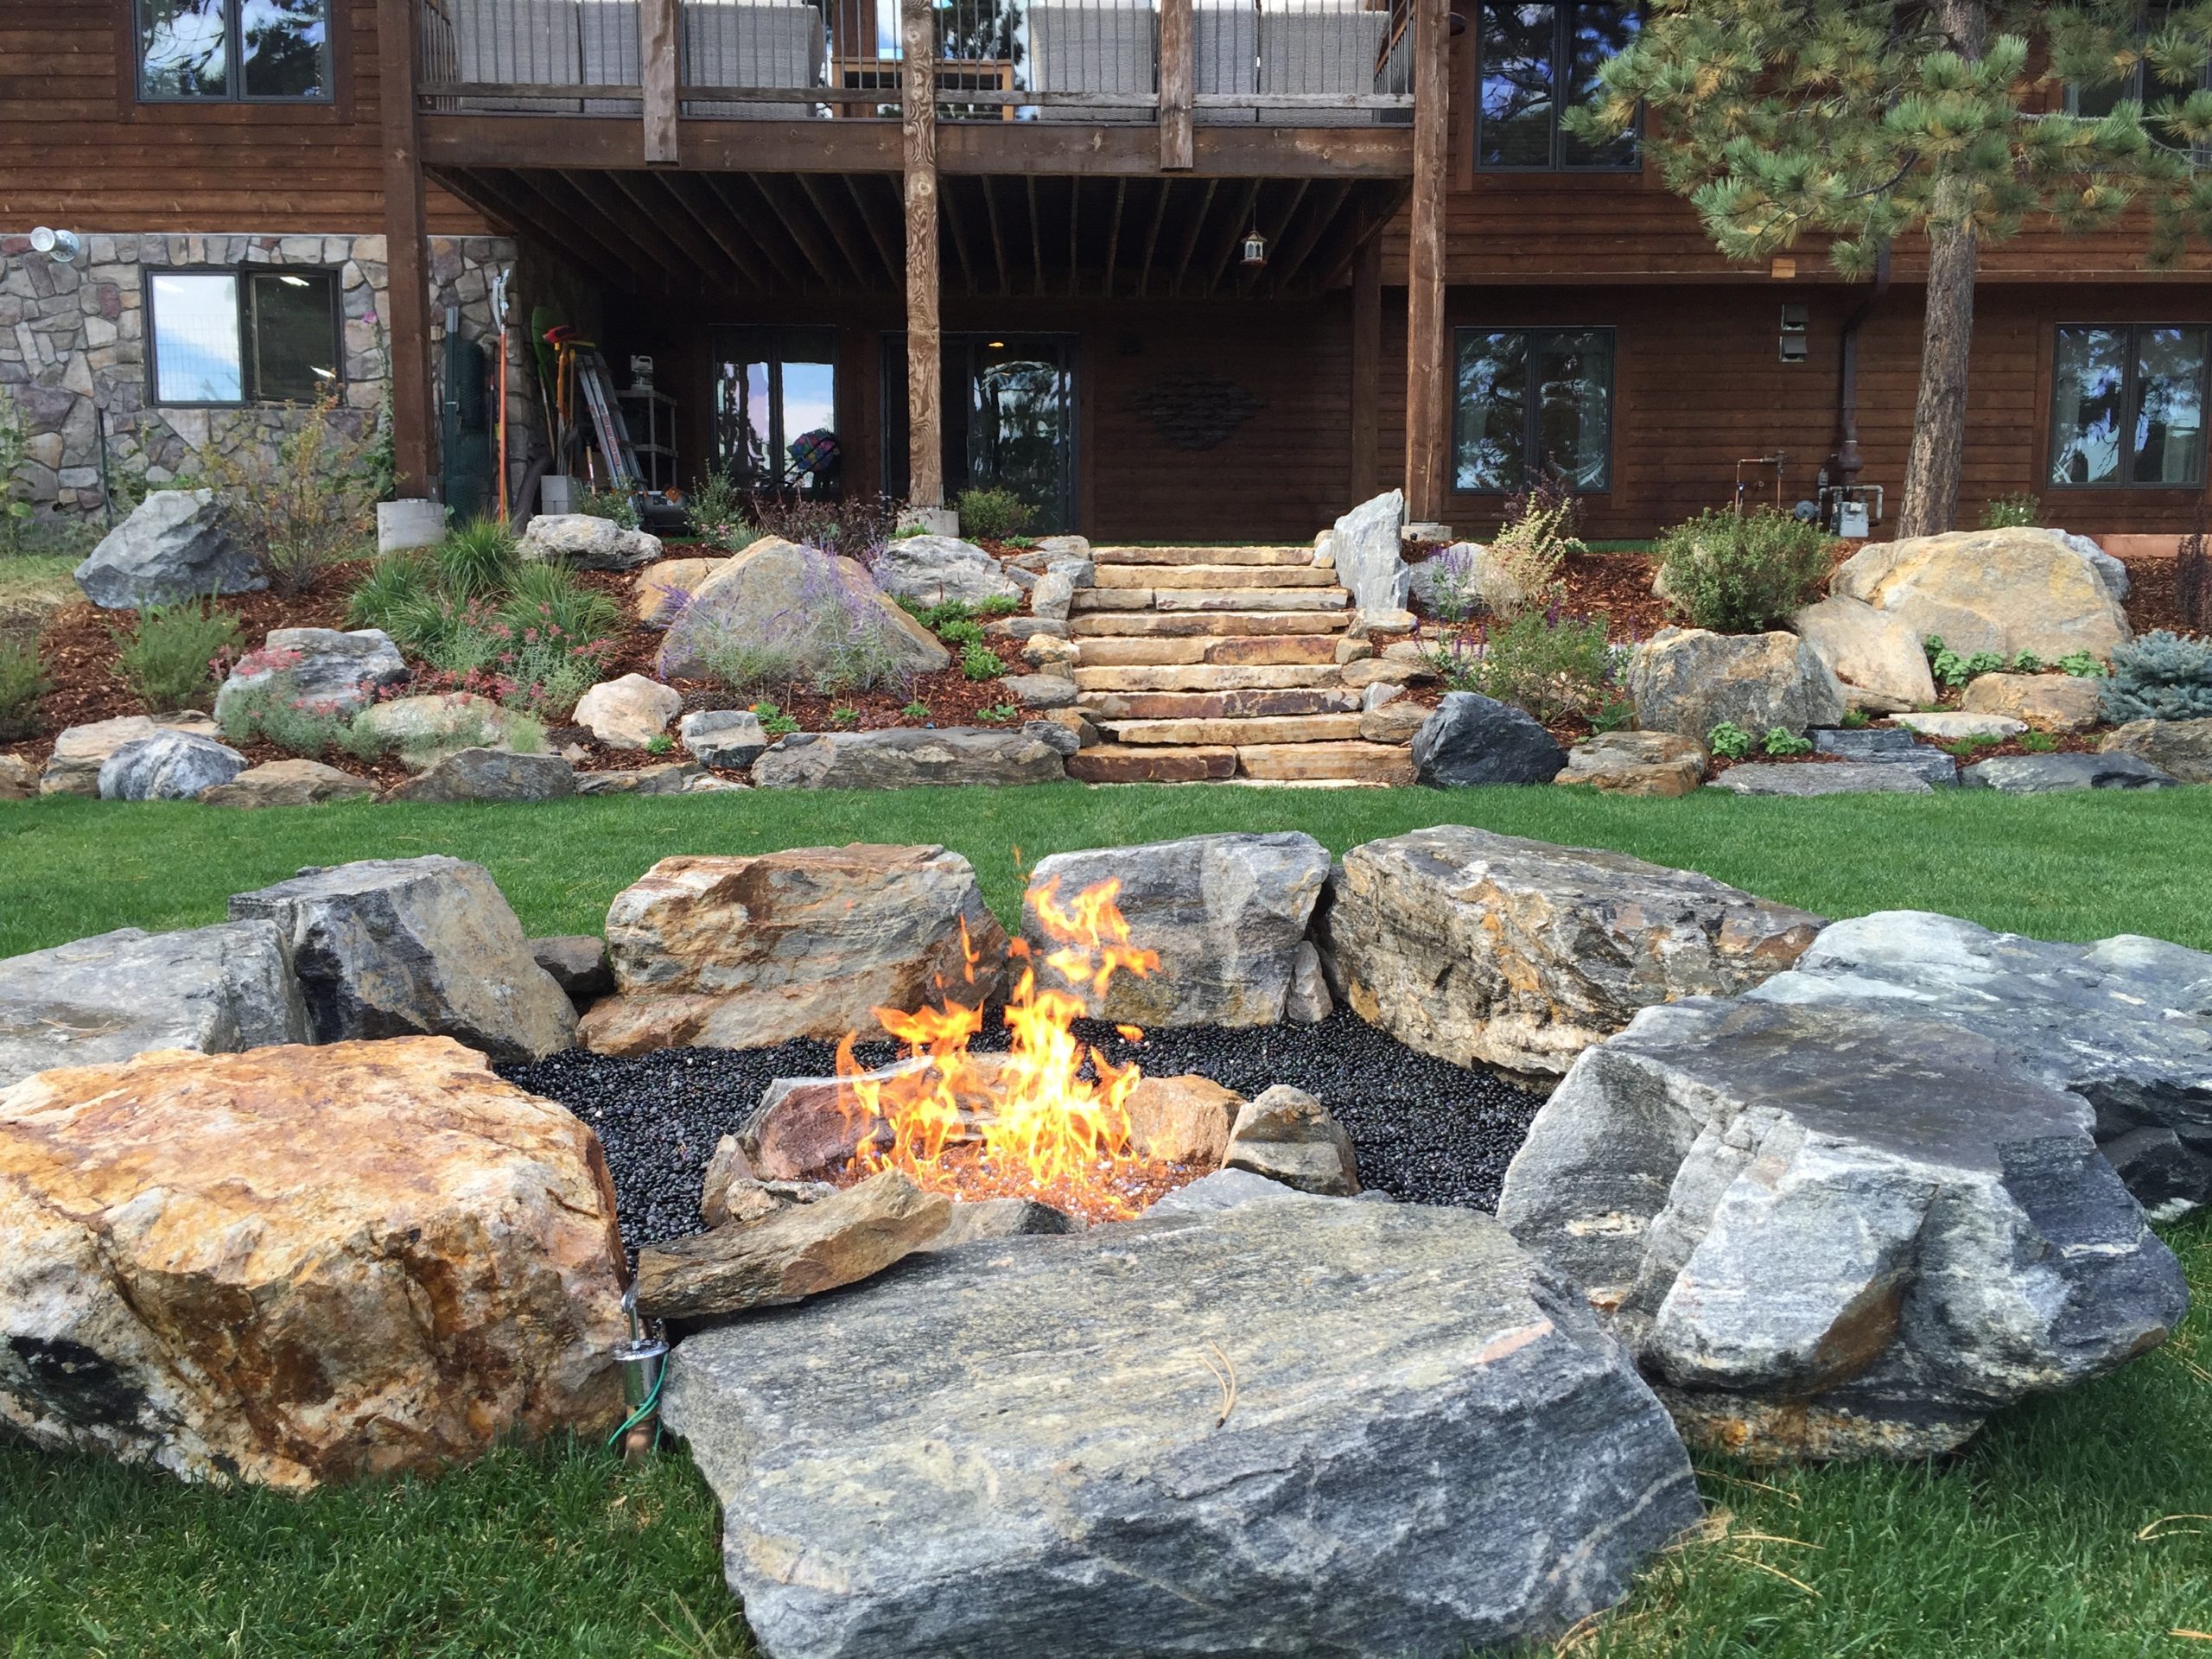 Lit fireplace with large rocks for seating, looking back at the house with other stone and plant landscaping